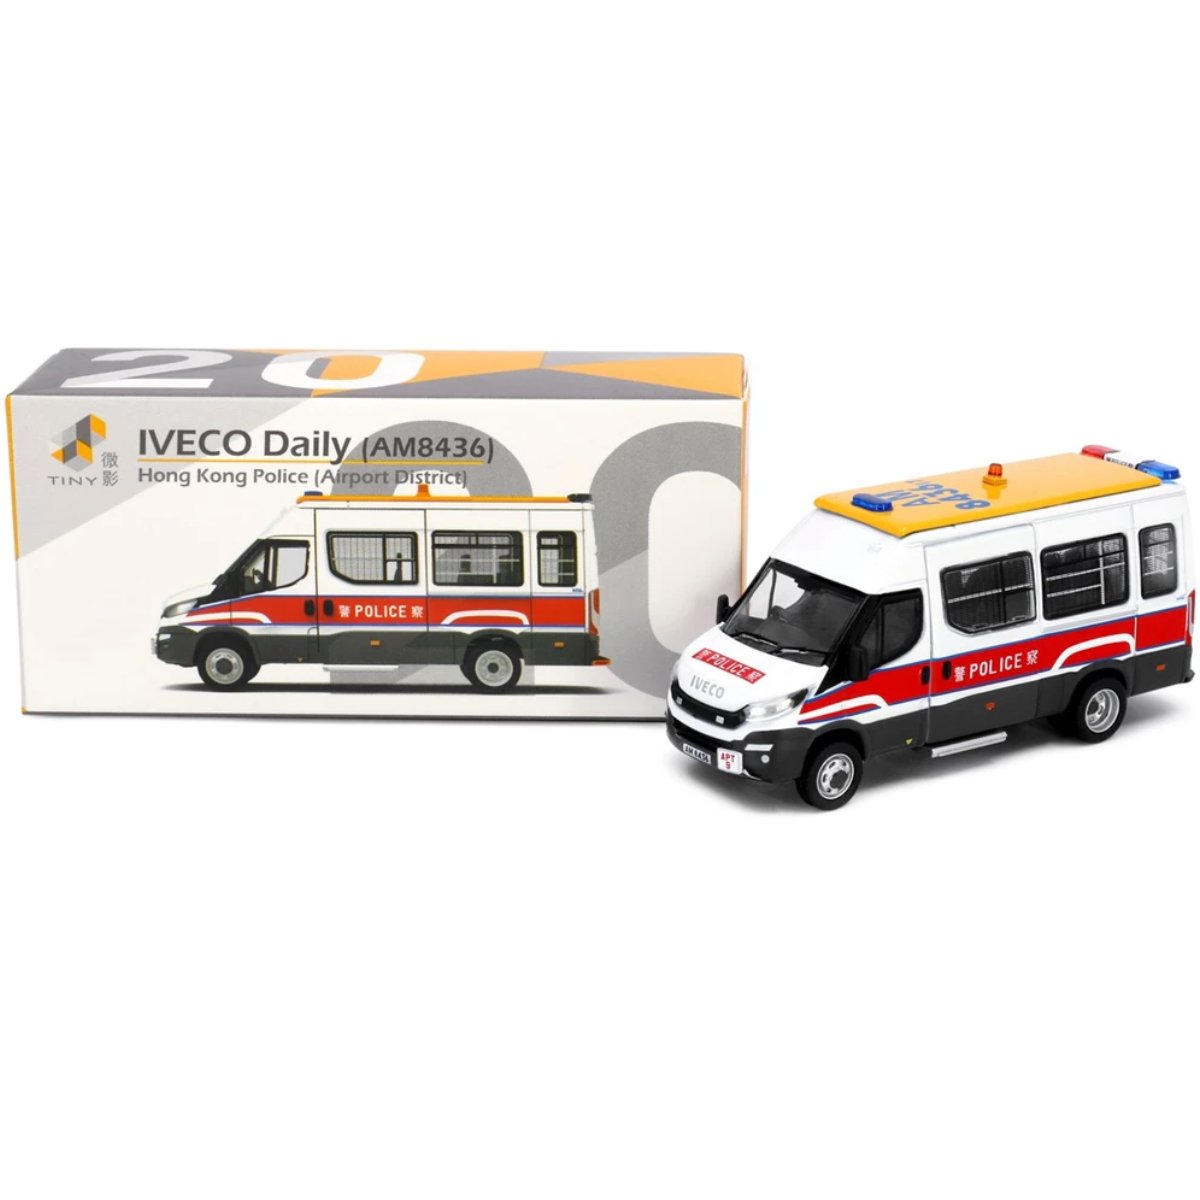 Tiny City Iveco Daily Police Patrol Van Airport District AM8436 (1:76 Scale) - Phillips Hobbies